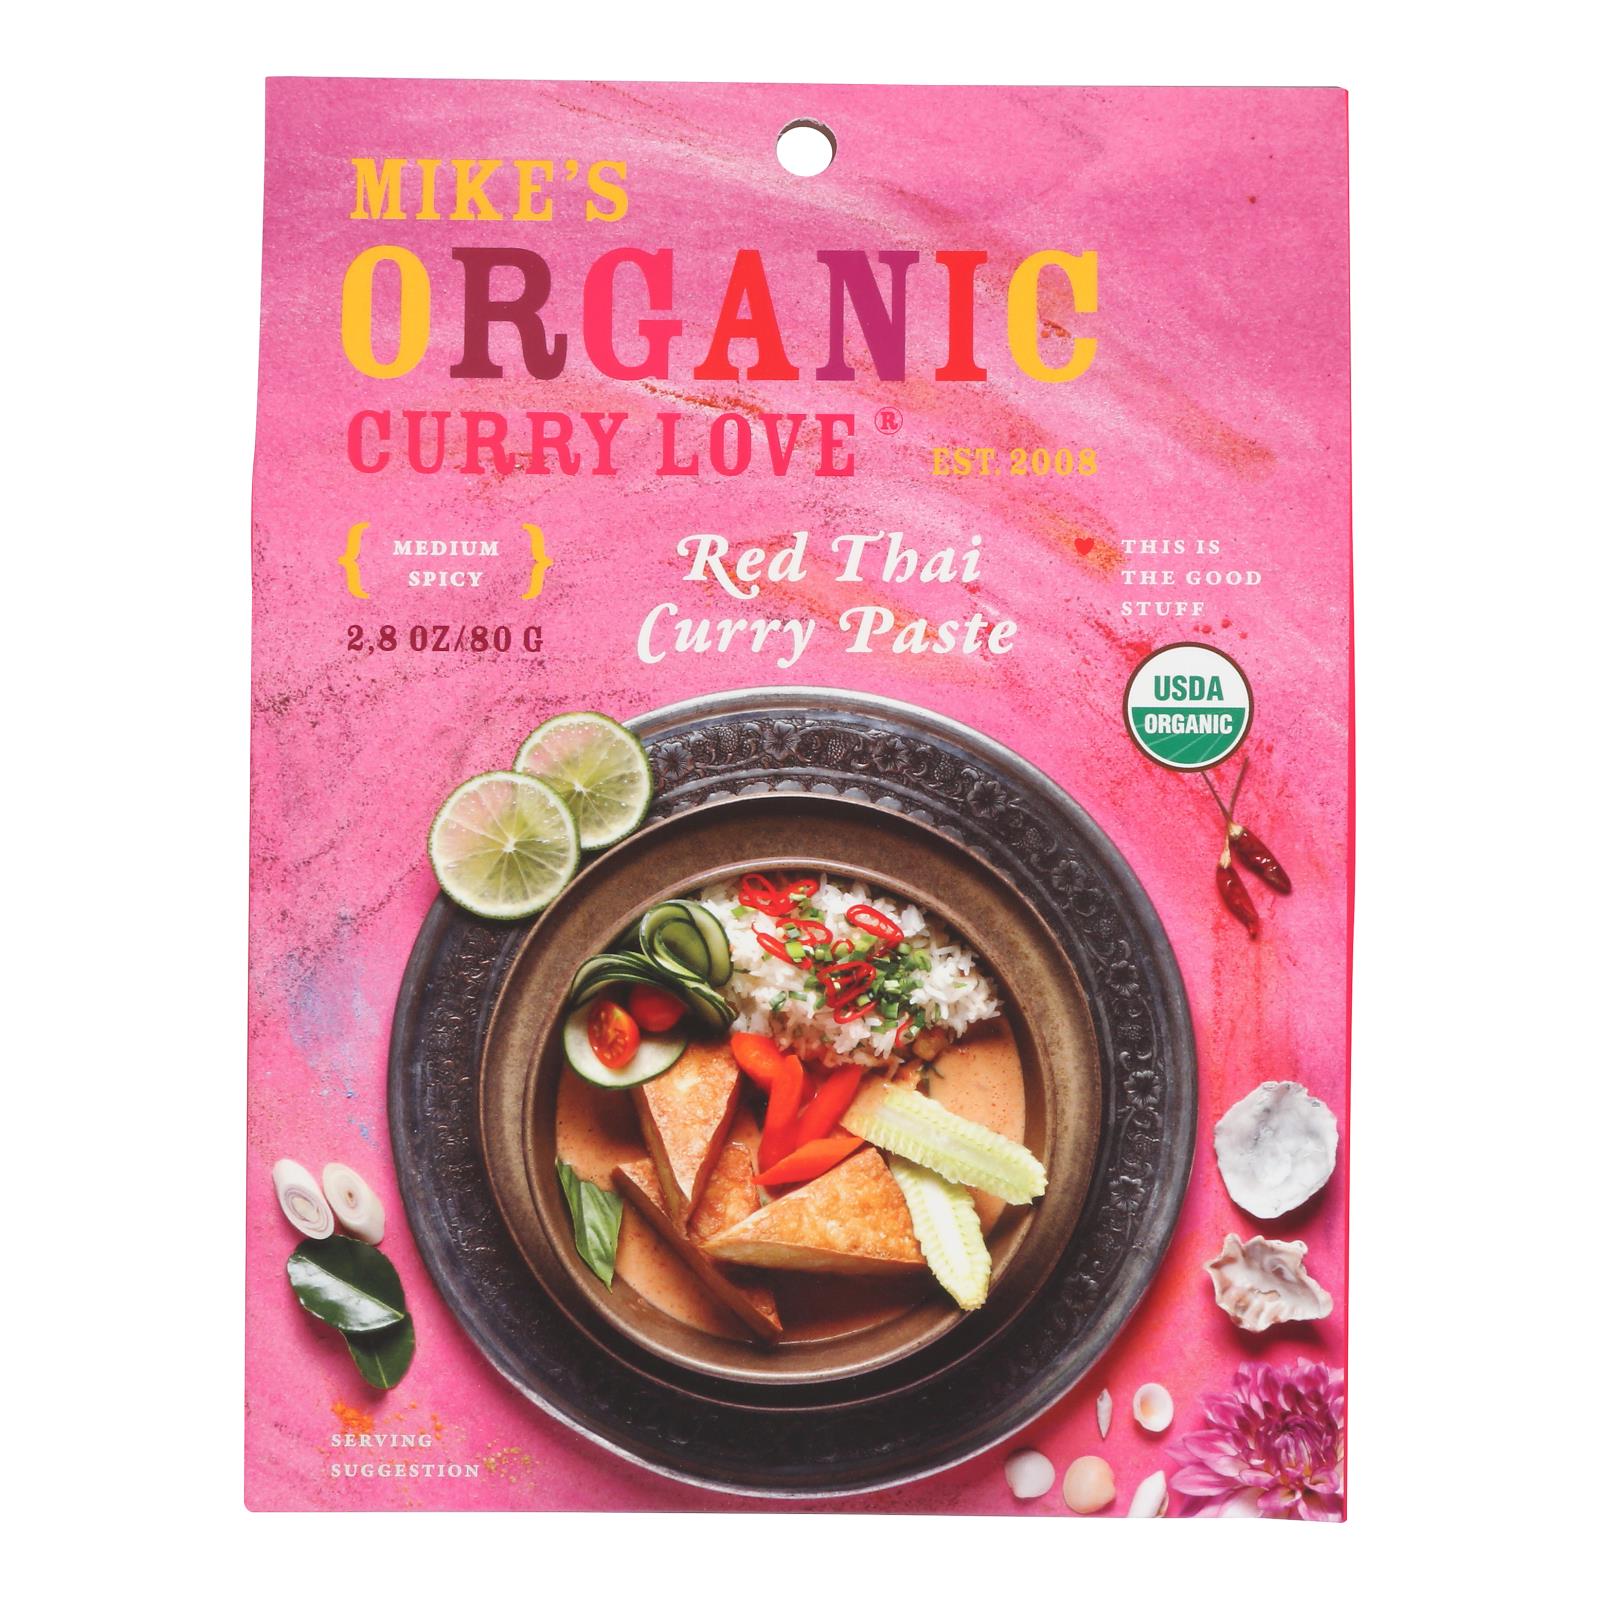 Mike's Organic Curry Love - Organic Curry Paste - Red Thai - Case Of 6 - 2.8 Oz.